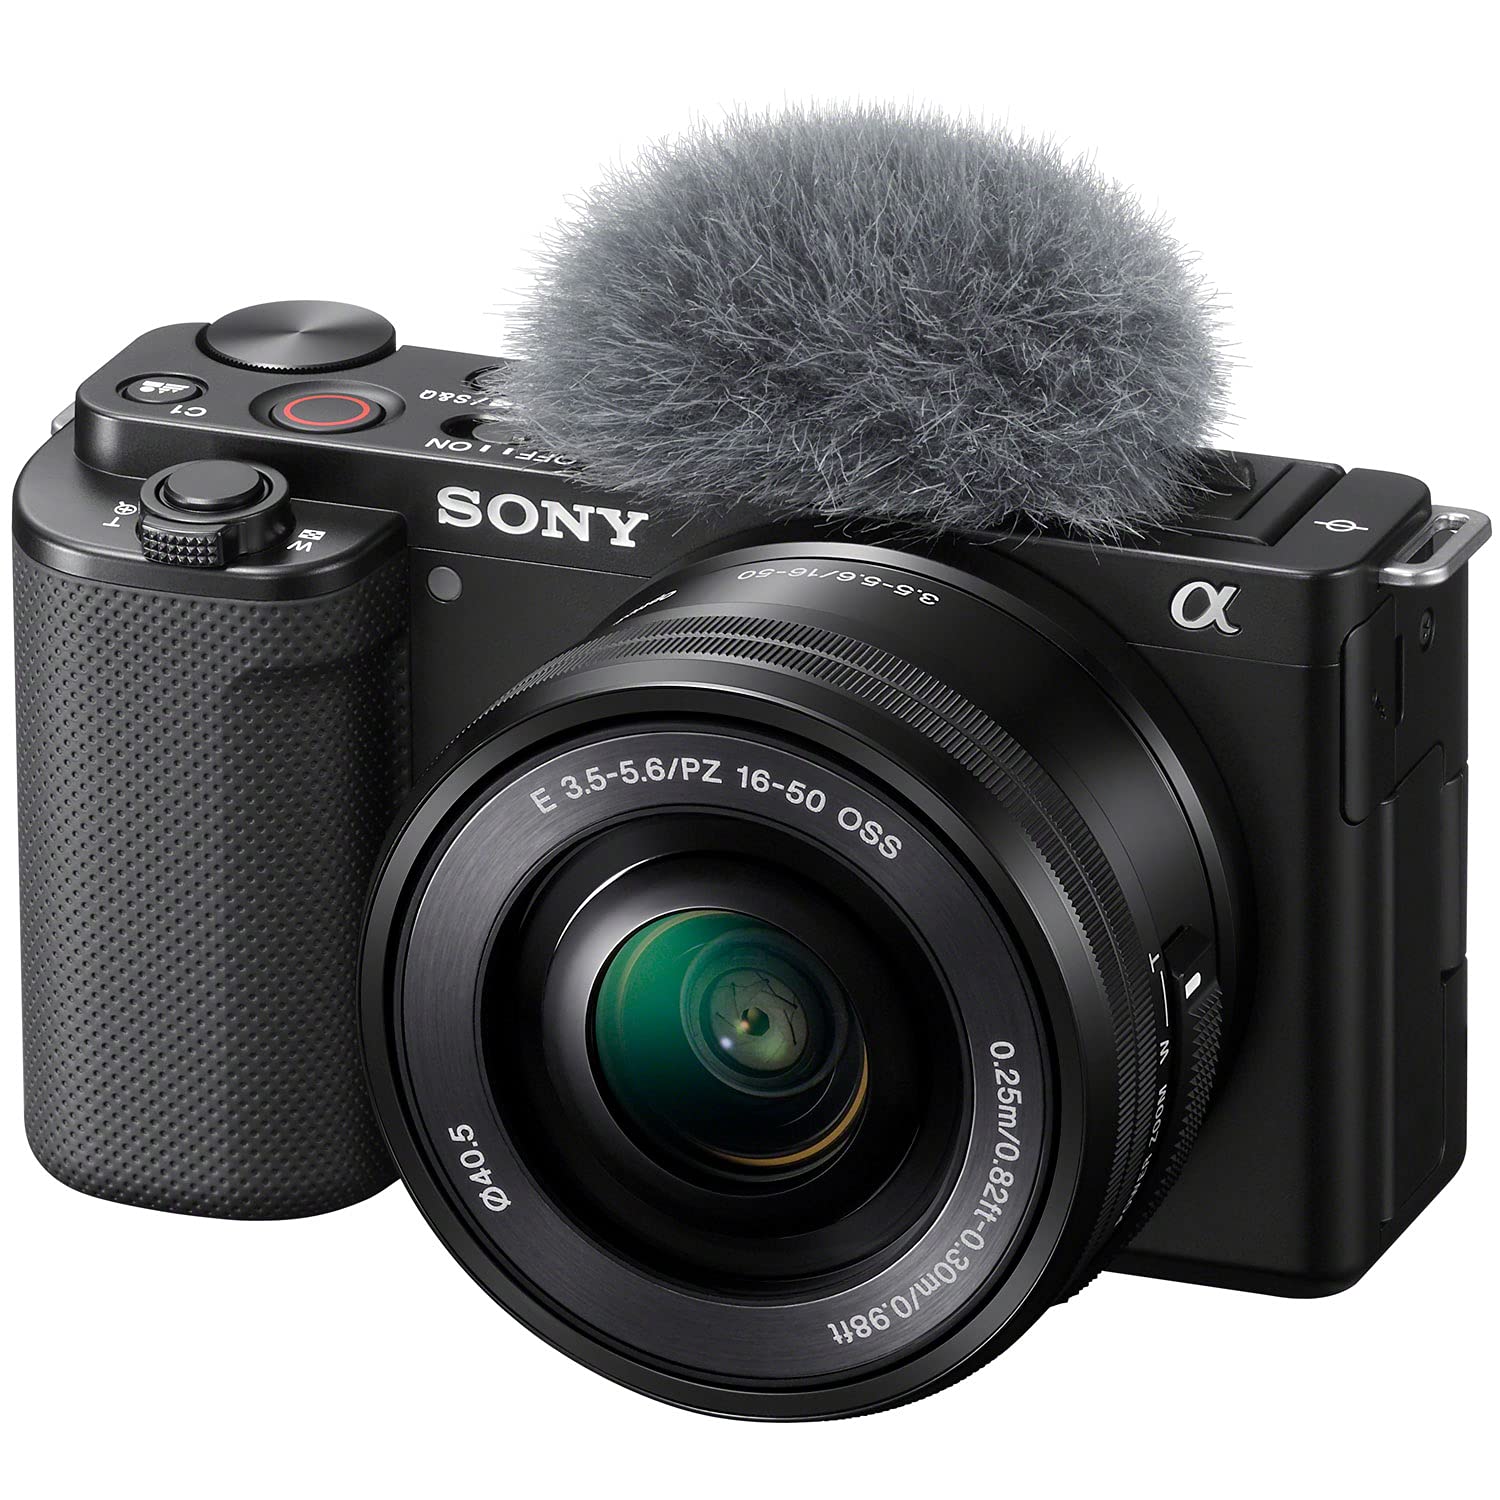 Sony ZV-E10 Mirrorless Alpha APS-C Vlog Camera Body and 16-50mm F3.5-5.6 Zoom Lens ILCZV-E10L/B Black Bundle with Deco Gear Photography Case + Extra Battery + Photo Video Software & Accessories Kit